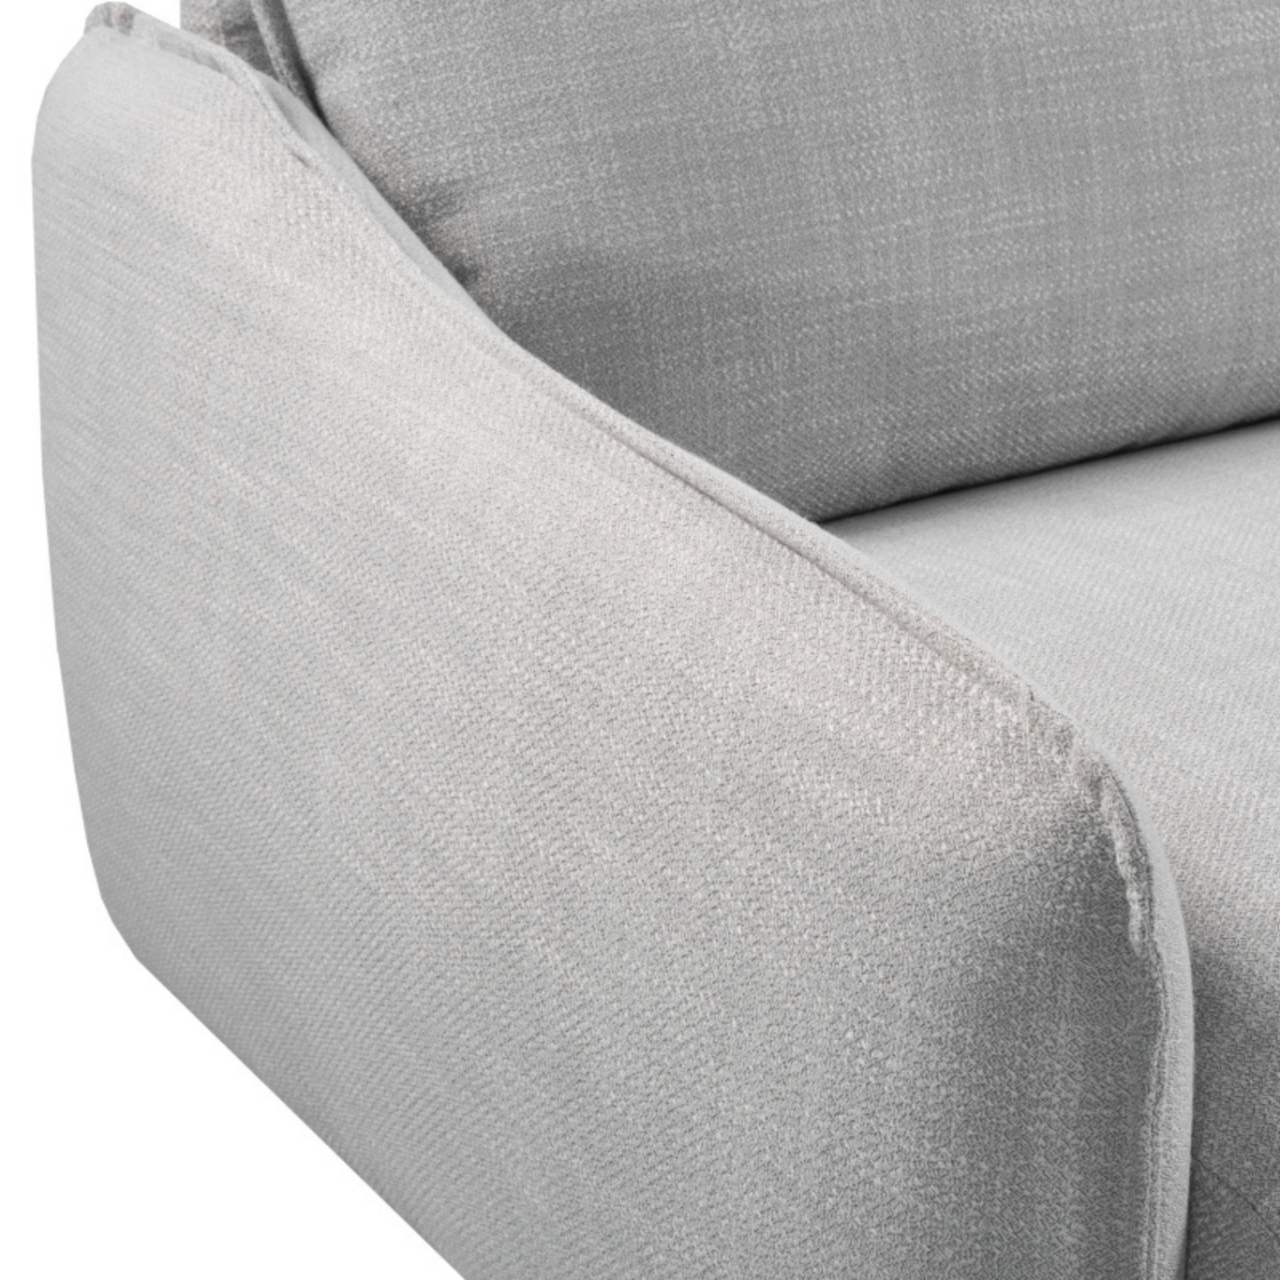 detail view of modern comfy 3 seater sofa upholstered in grey linen fabric